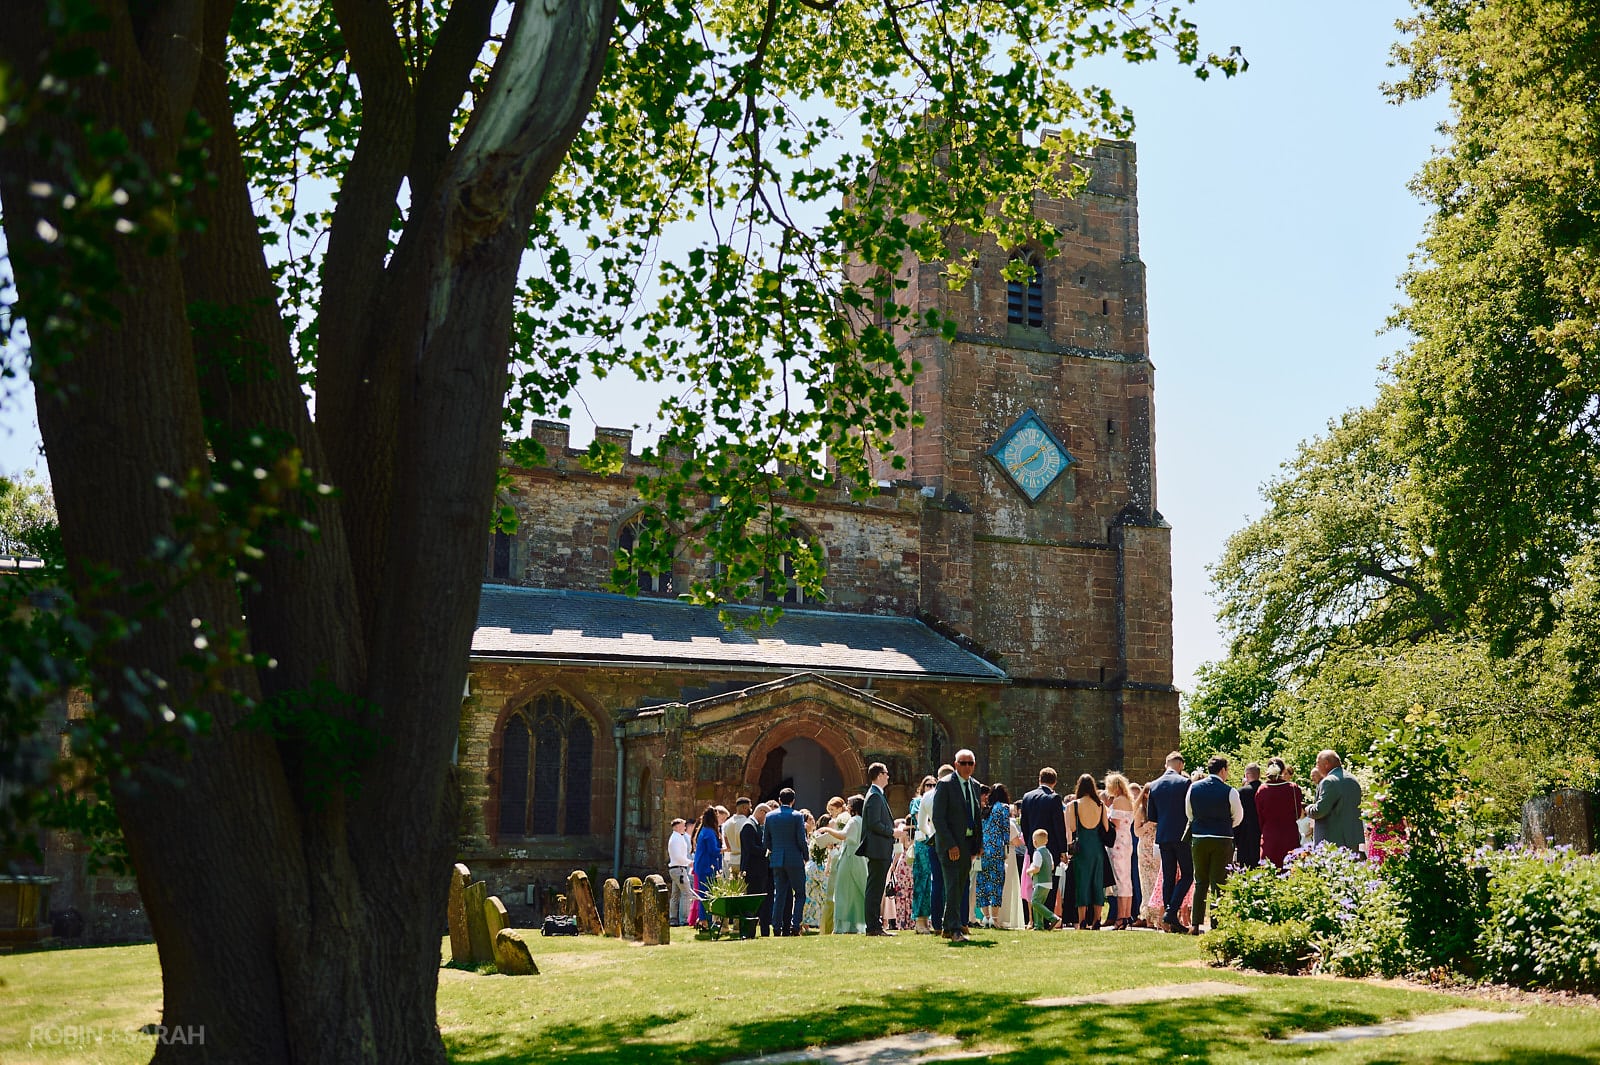 Guests congratulate bride and groom after wedding ceremony at St Botolph's church Newbold-on-Avon